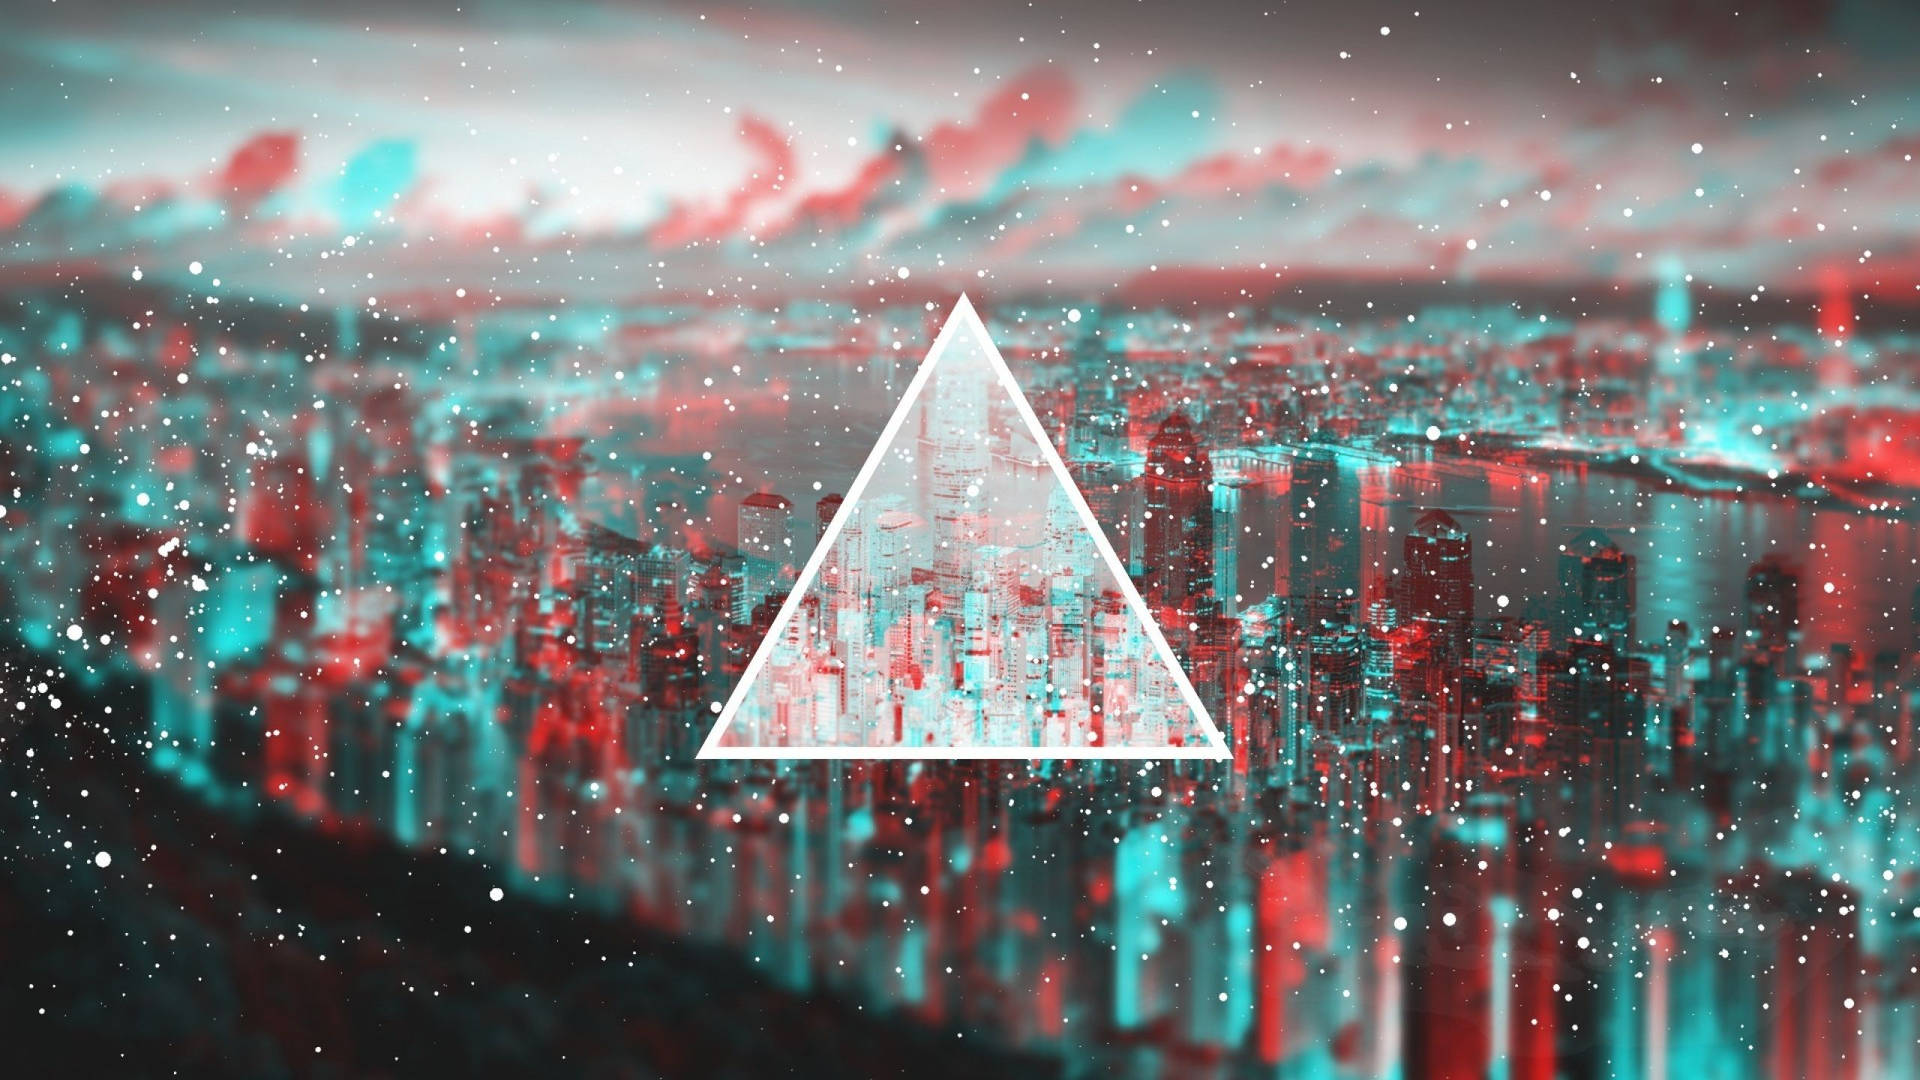 Cool Triangle Poster wallpaper.